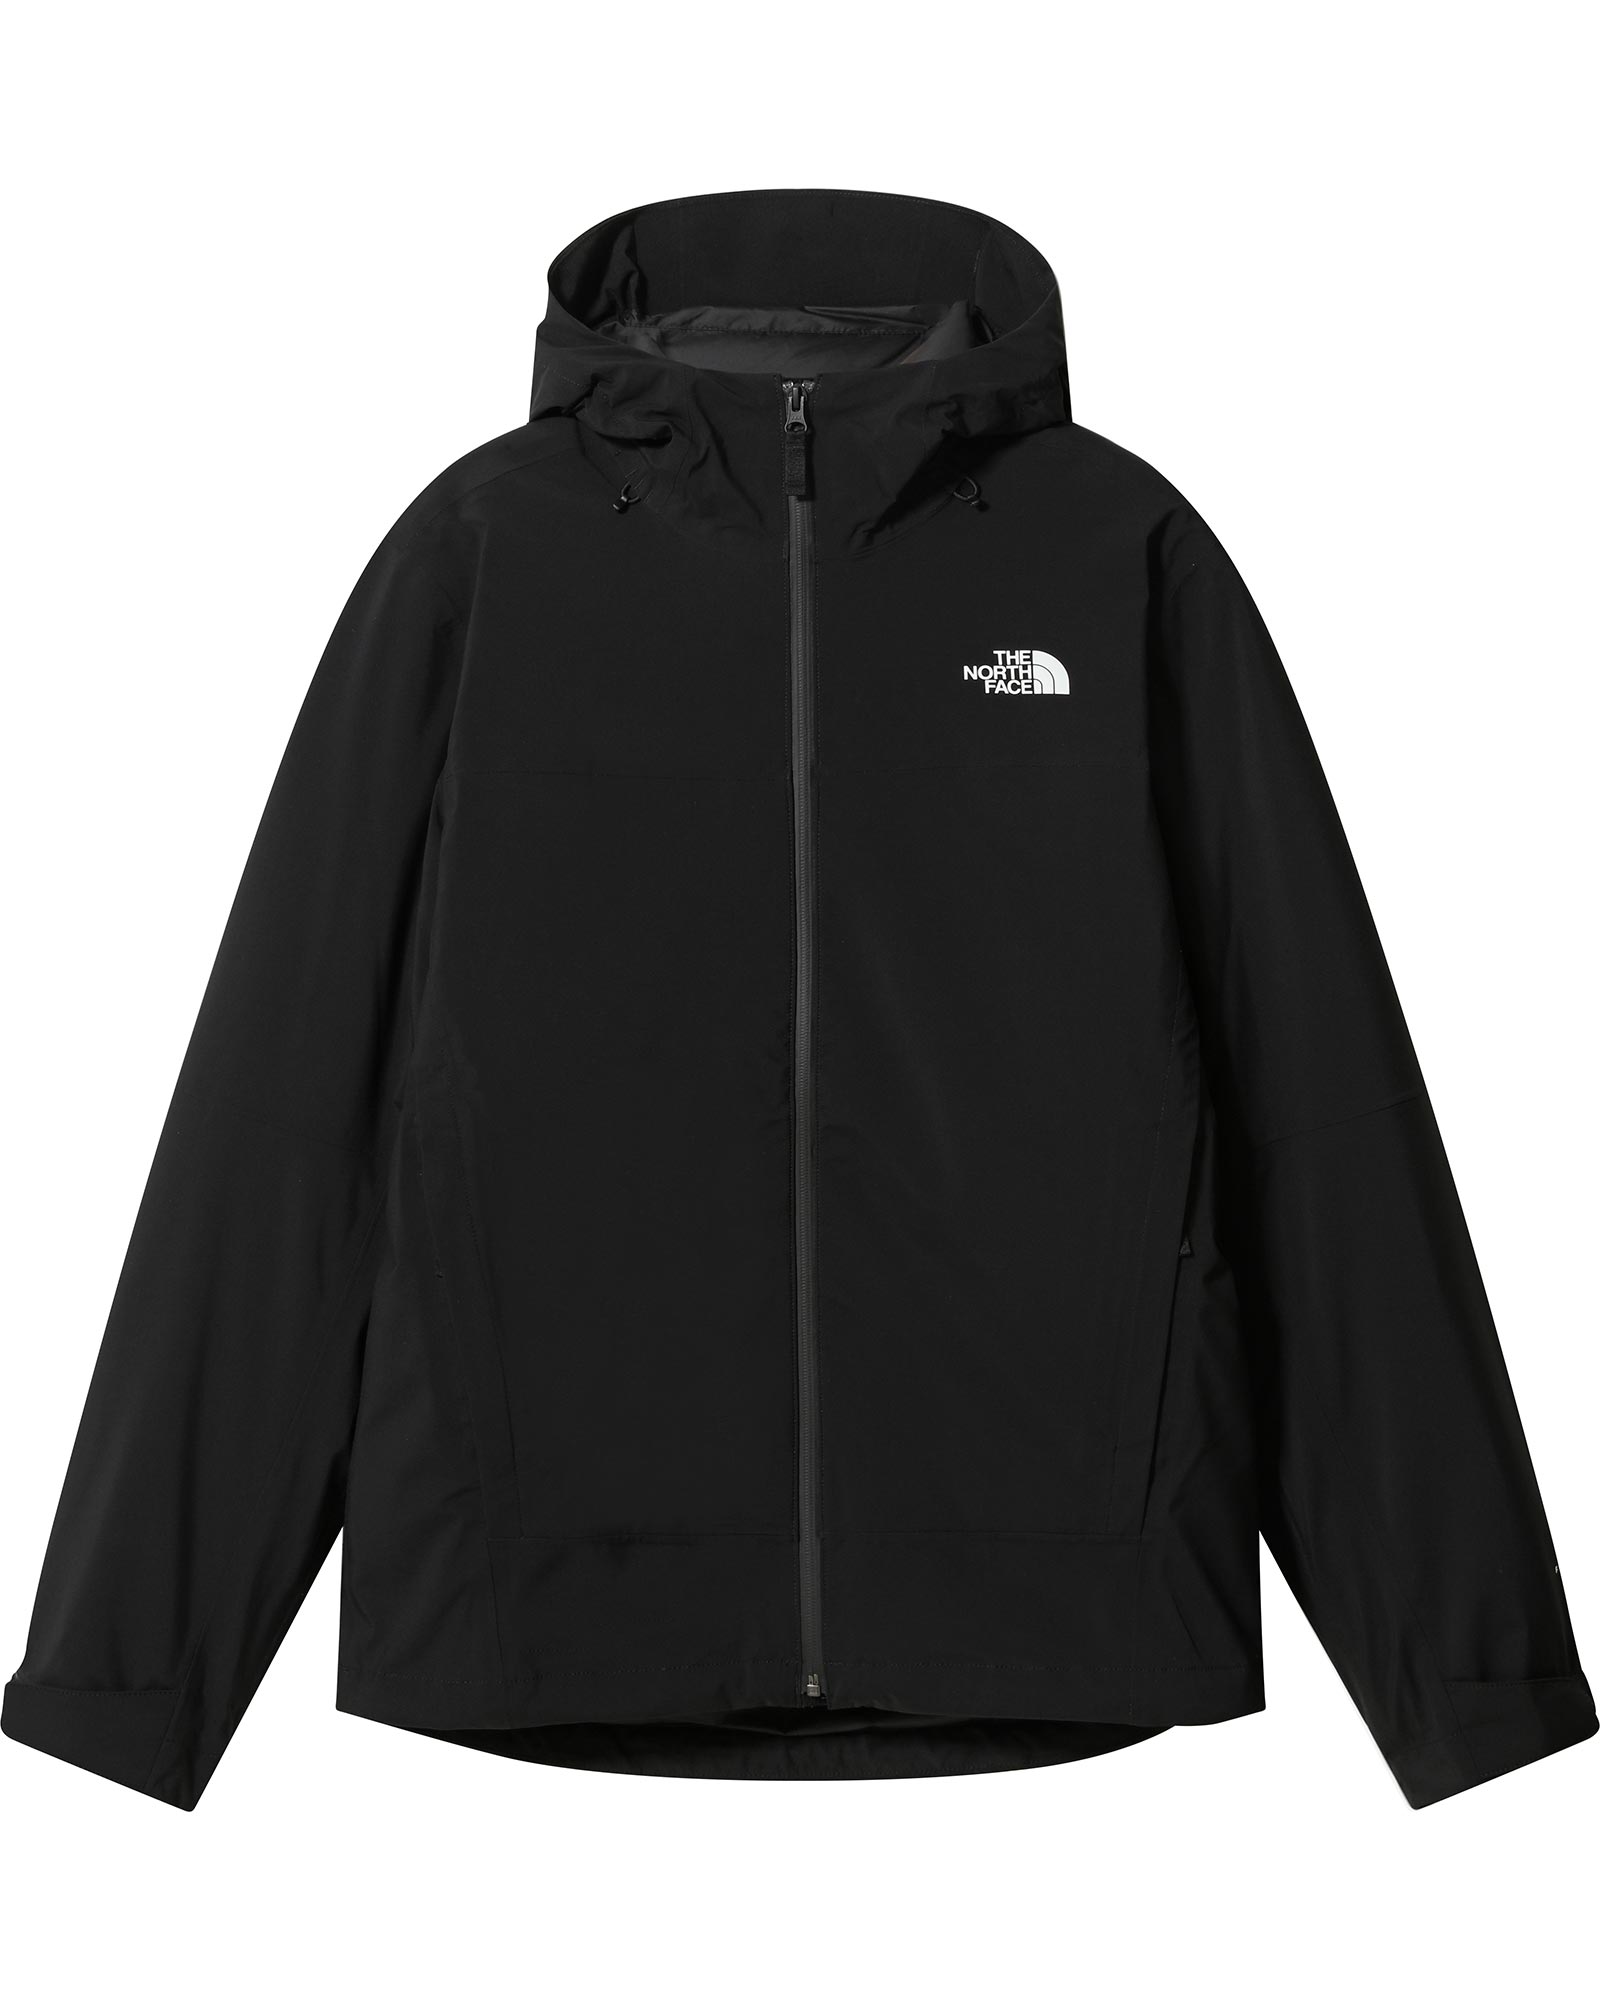 The North Face Men's Mountain Light FUTURELIGHT Triclimate Jacket